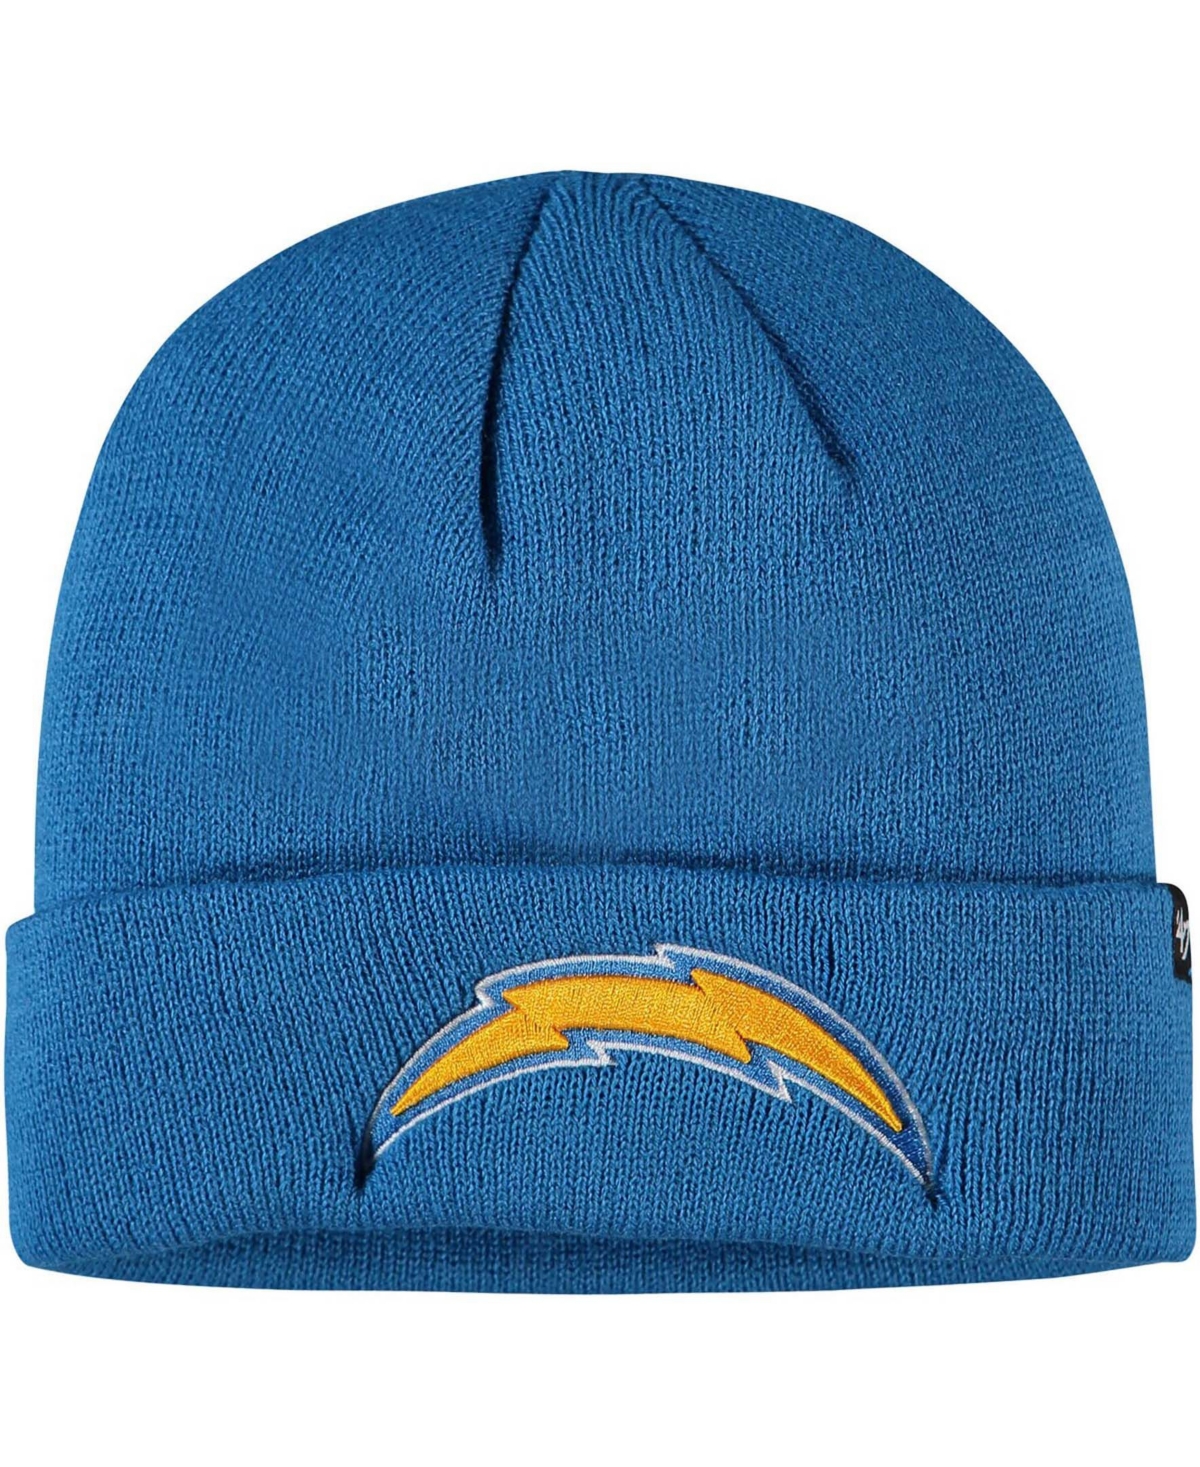 47 Brand Kids' Boys Blue Los Angeles Chargers Basic Cuffed Knit Hat